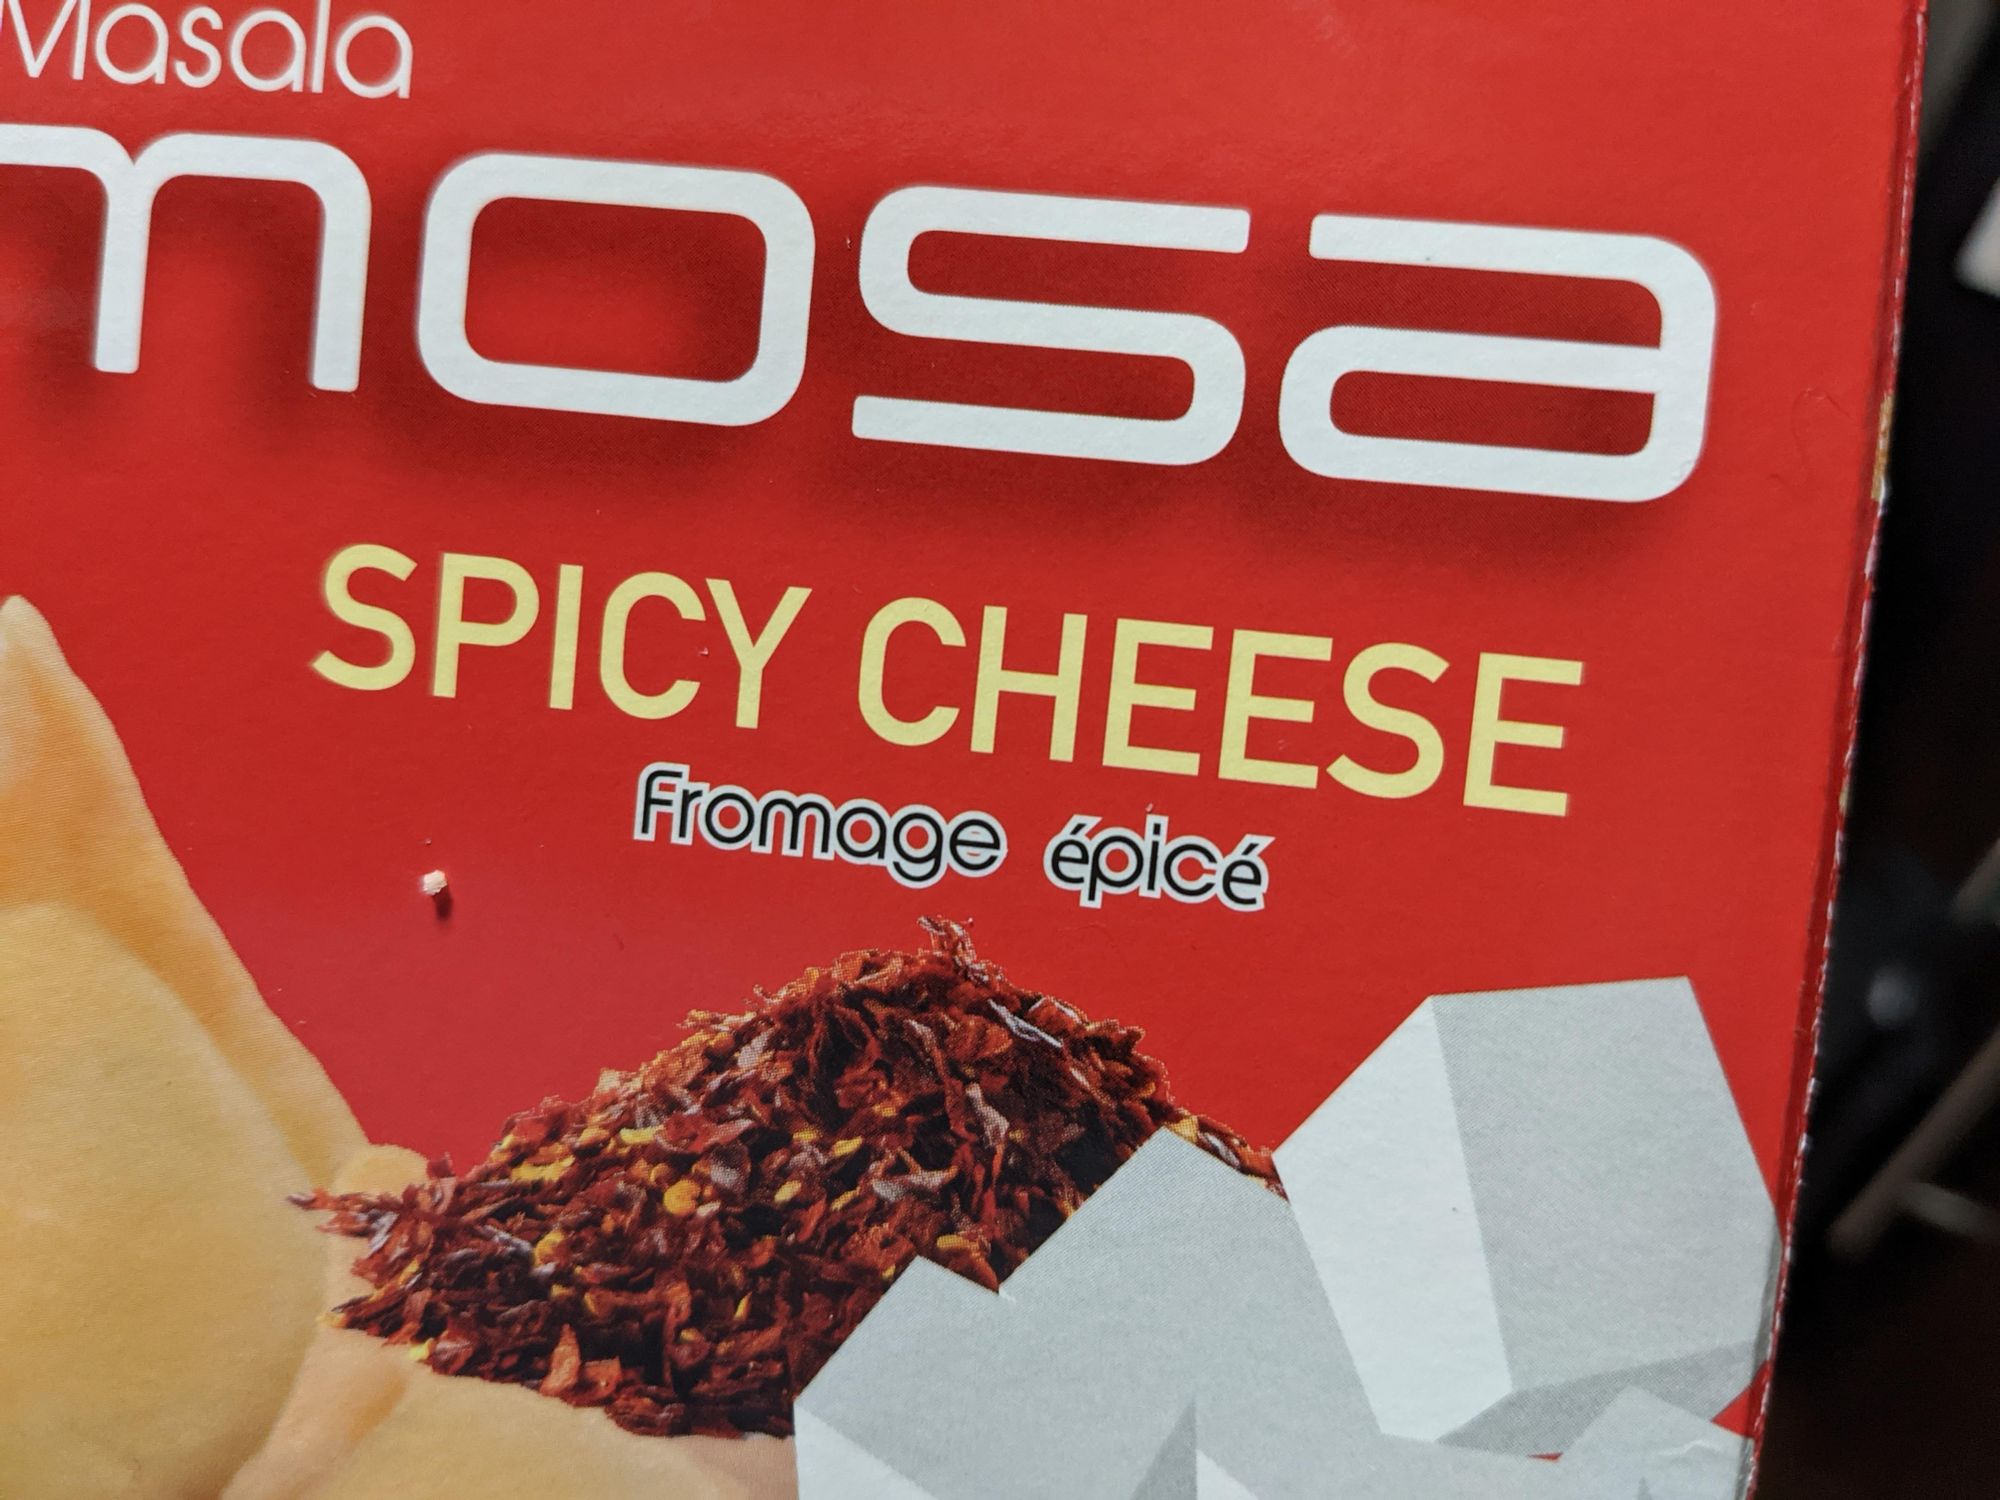 A picture of a box of samosas, they are spicy cheese flavored, with a picture of a pile of spices and what I assume is Feta? cheese cubes.